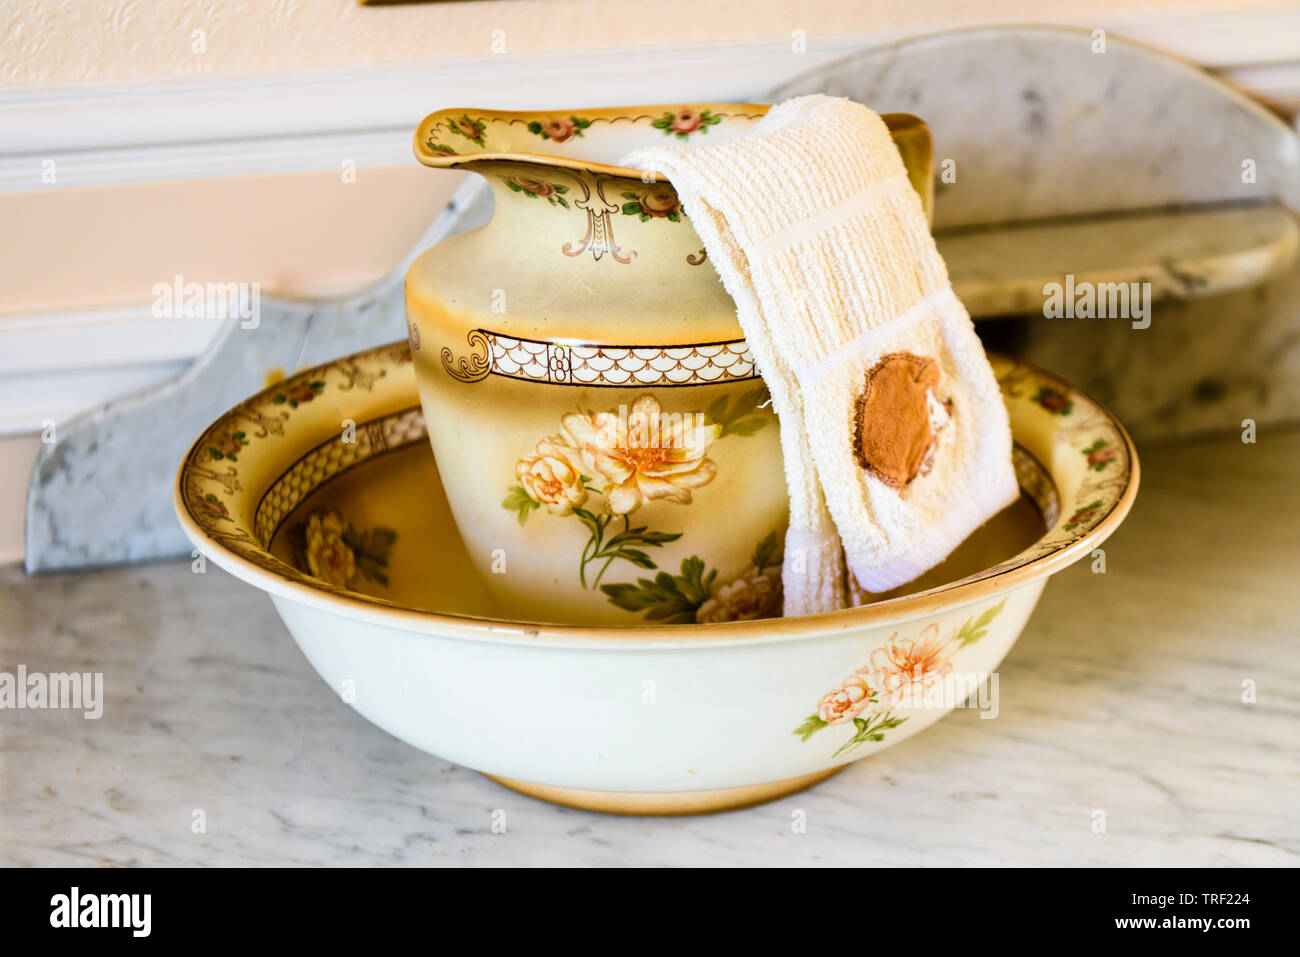 Old fashioned ceramic washbowl and jug with a facecloth. Stock Photo